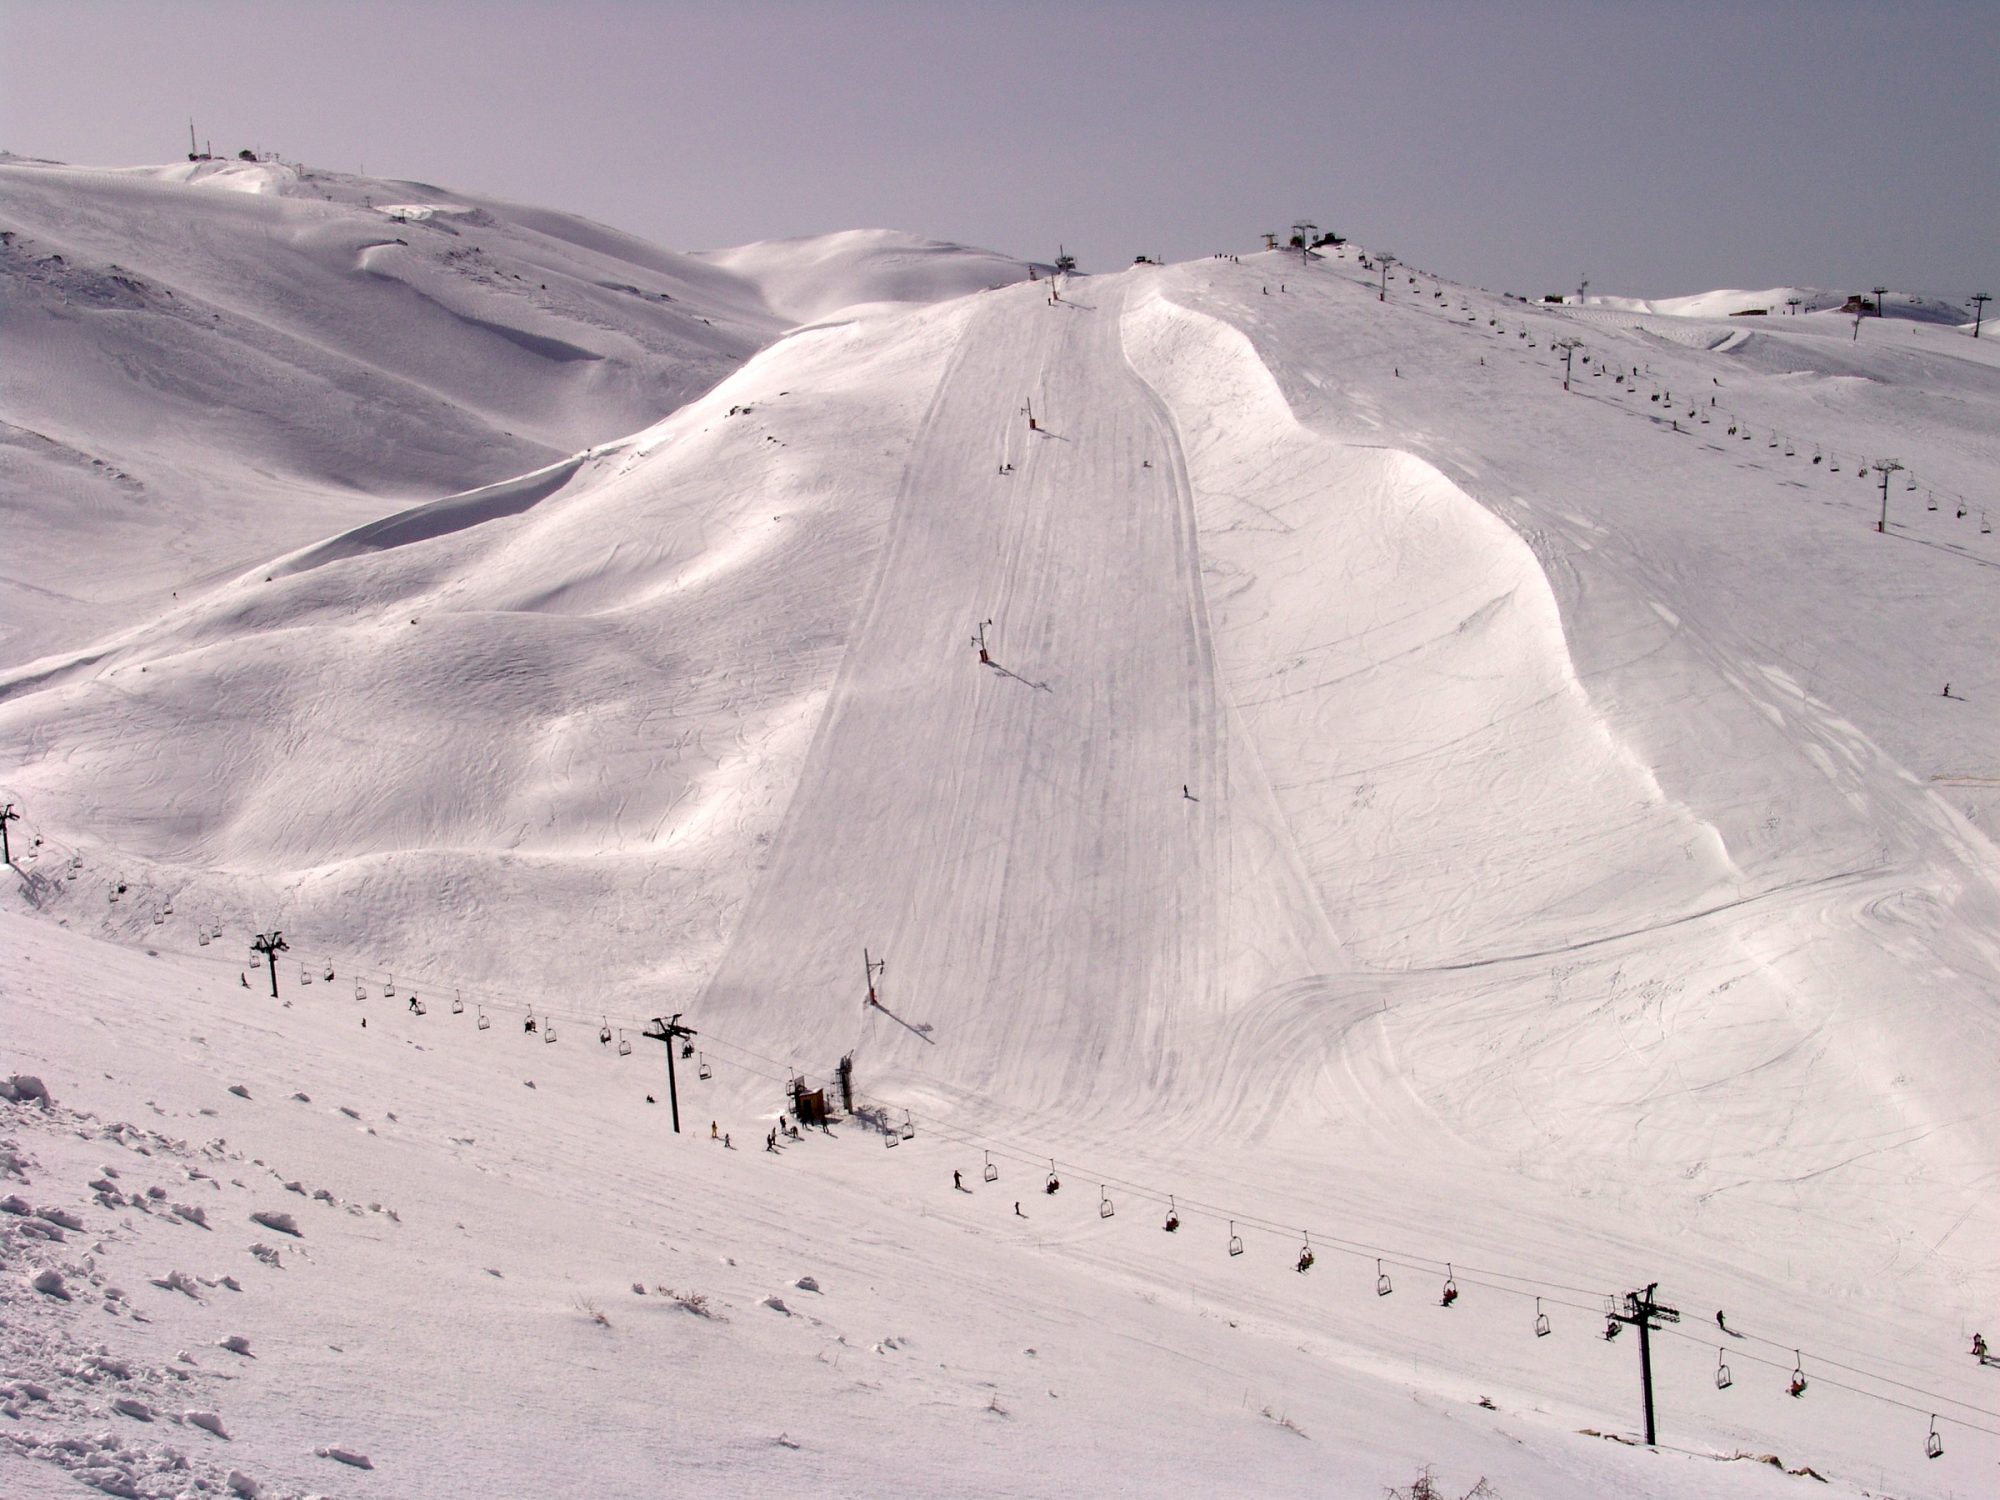 I Never Knew You Could Ski There: Lebanon